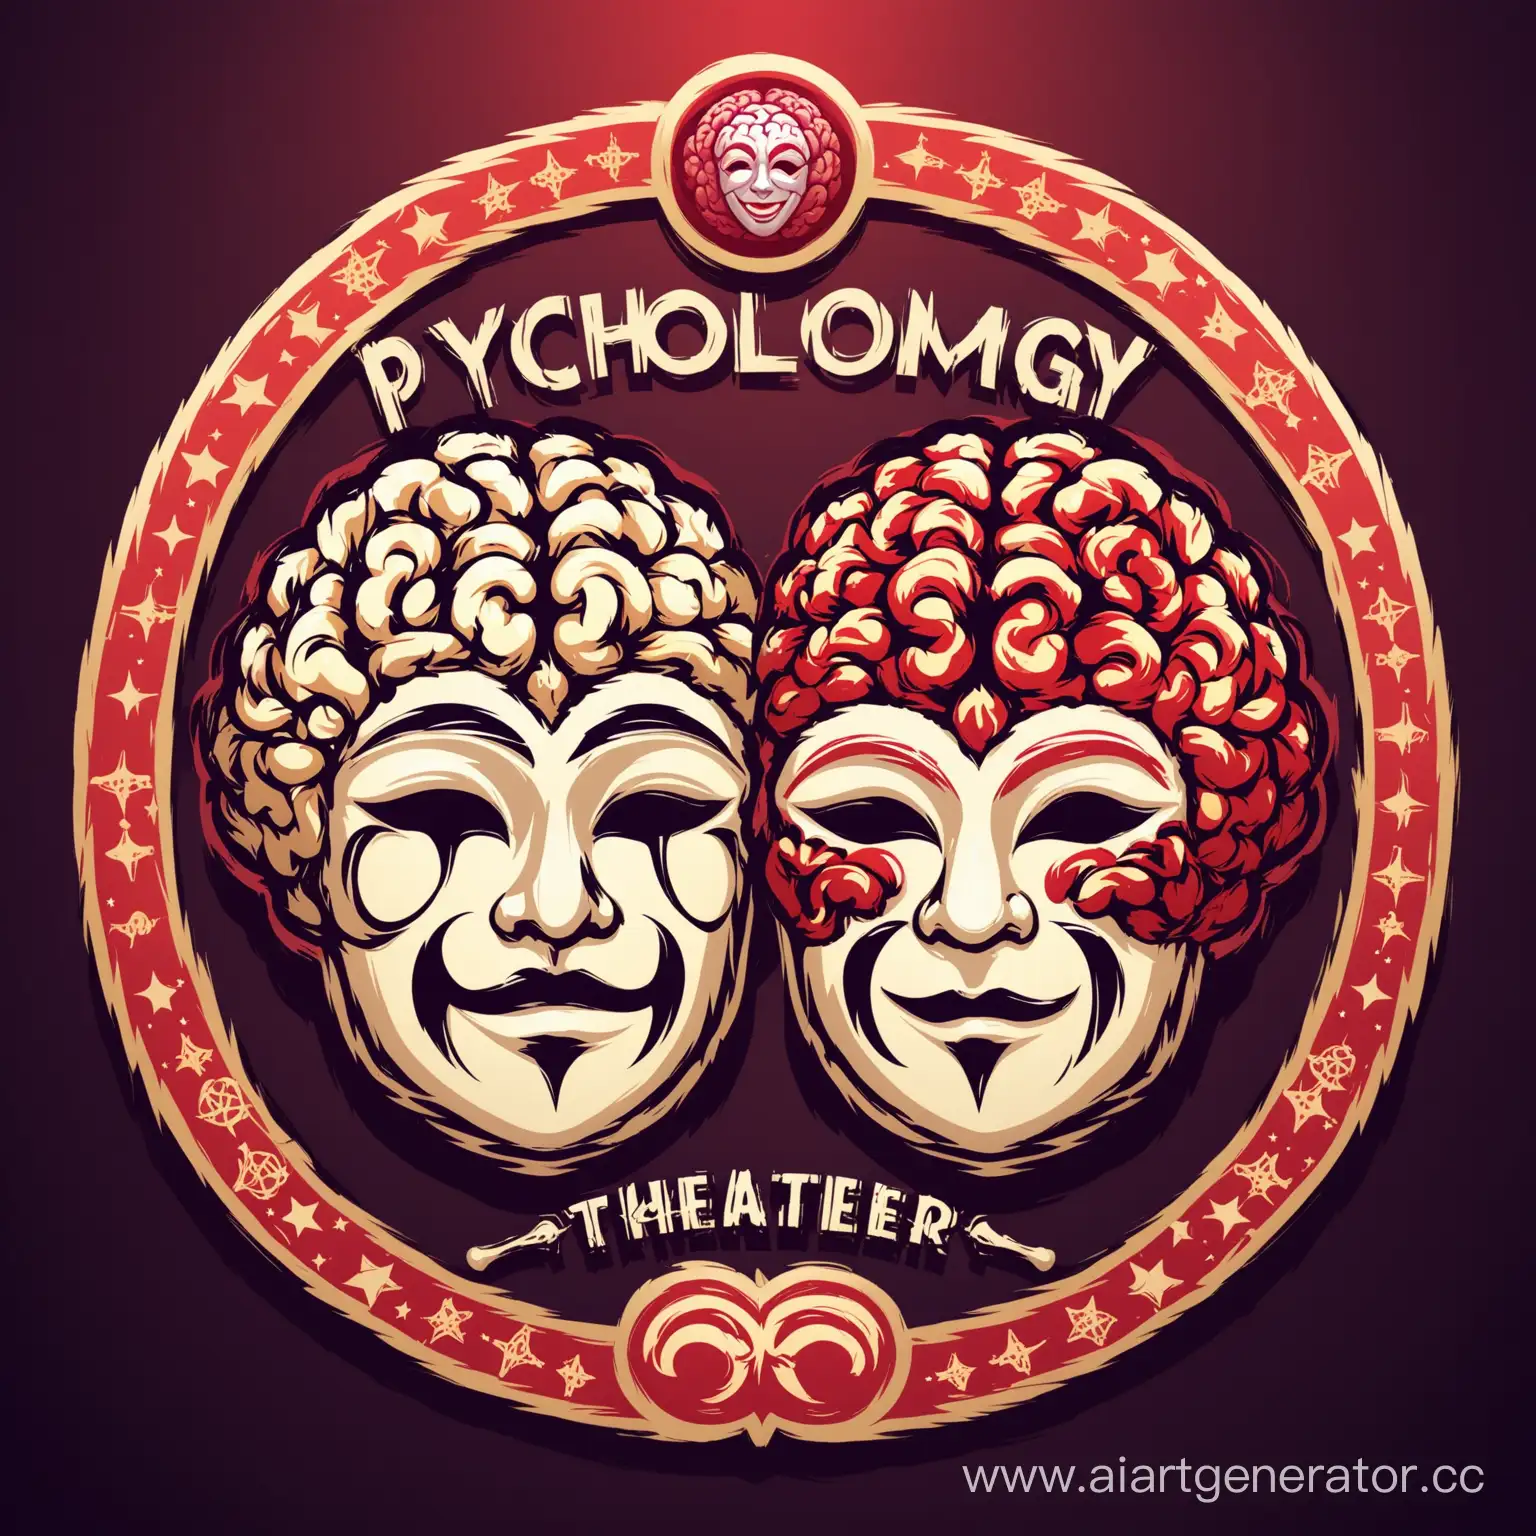 Psychological-Theater-Logo-Fusion-of-Comedy-and-Tragedy-Masks-with-Brain-Convolution-Motif-in-Russian